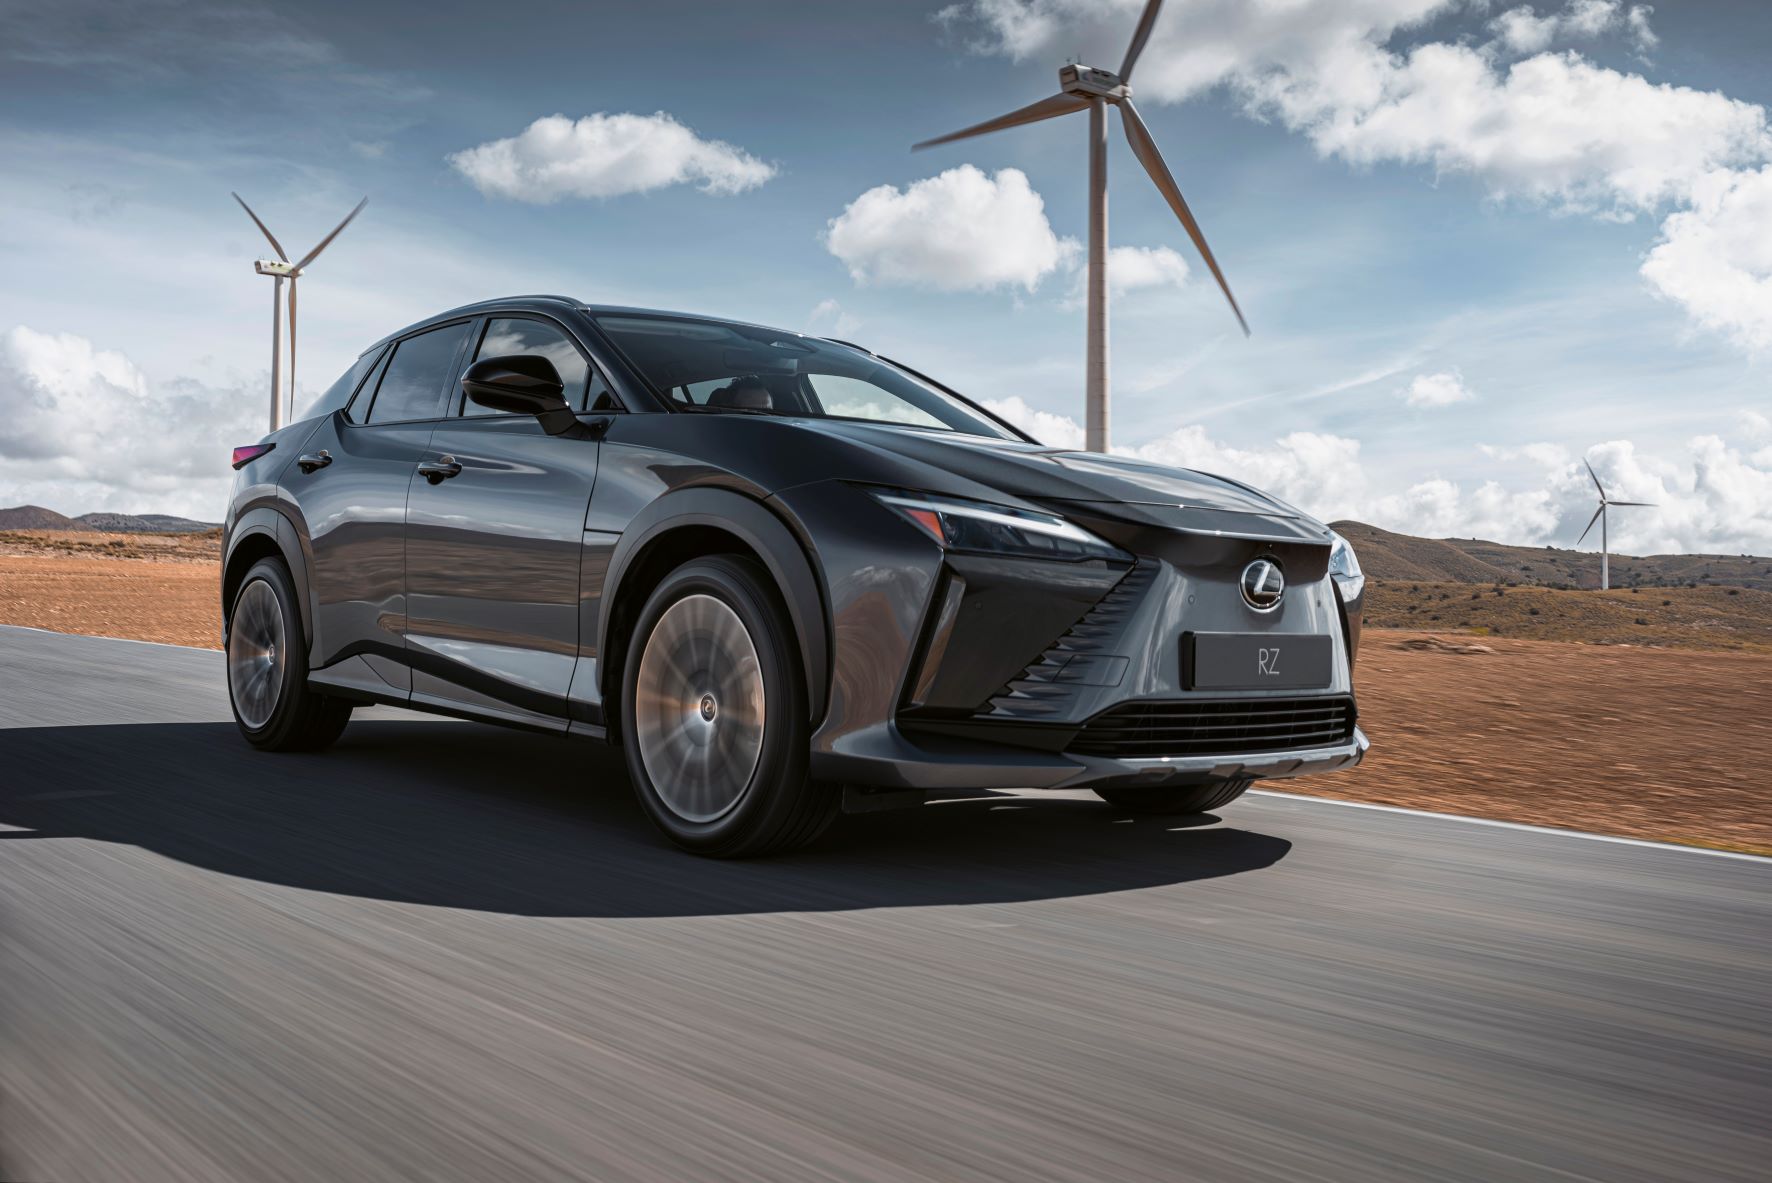 Front three quarters view of a new Lexus RZ 450e EV in grey